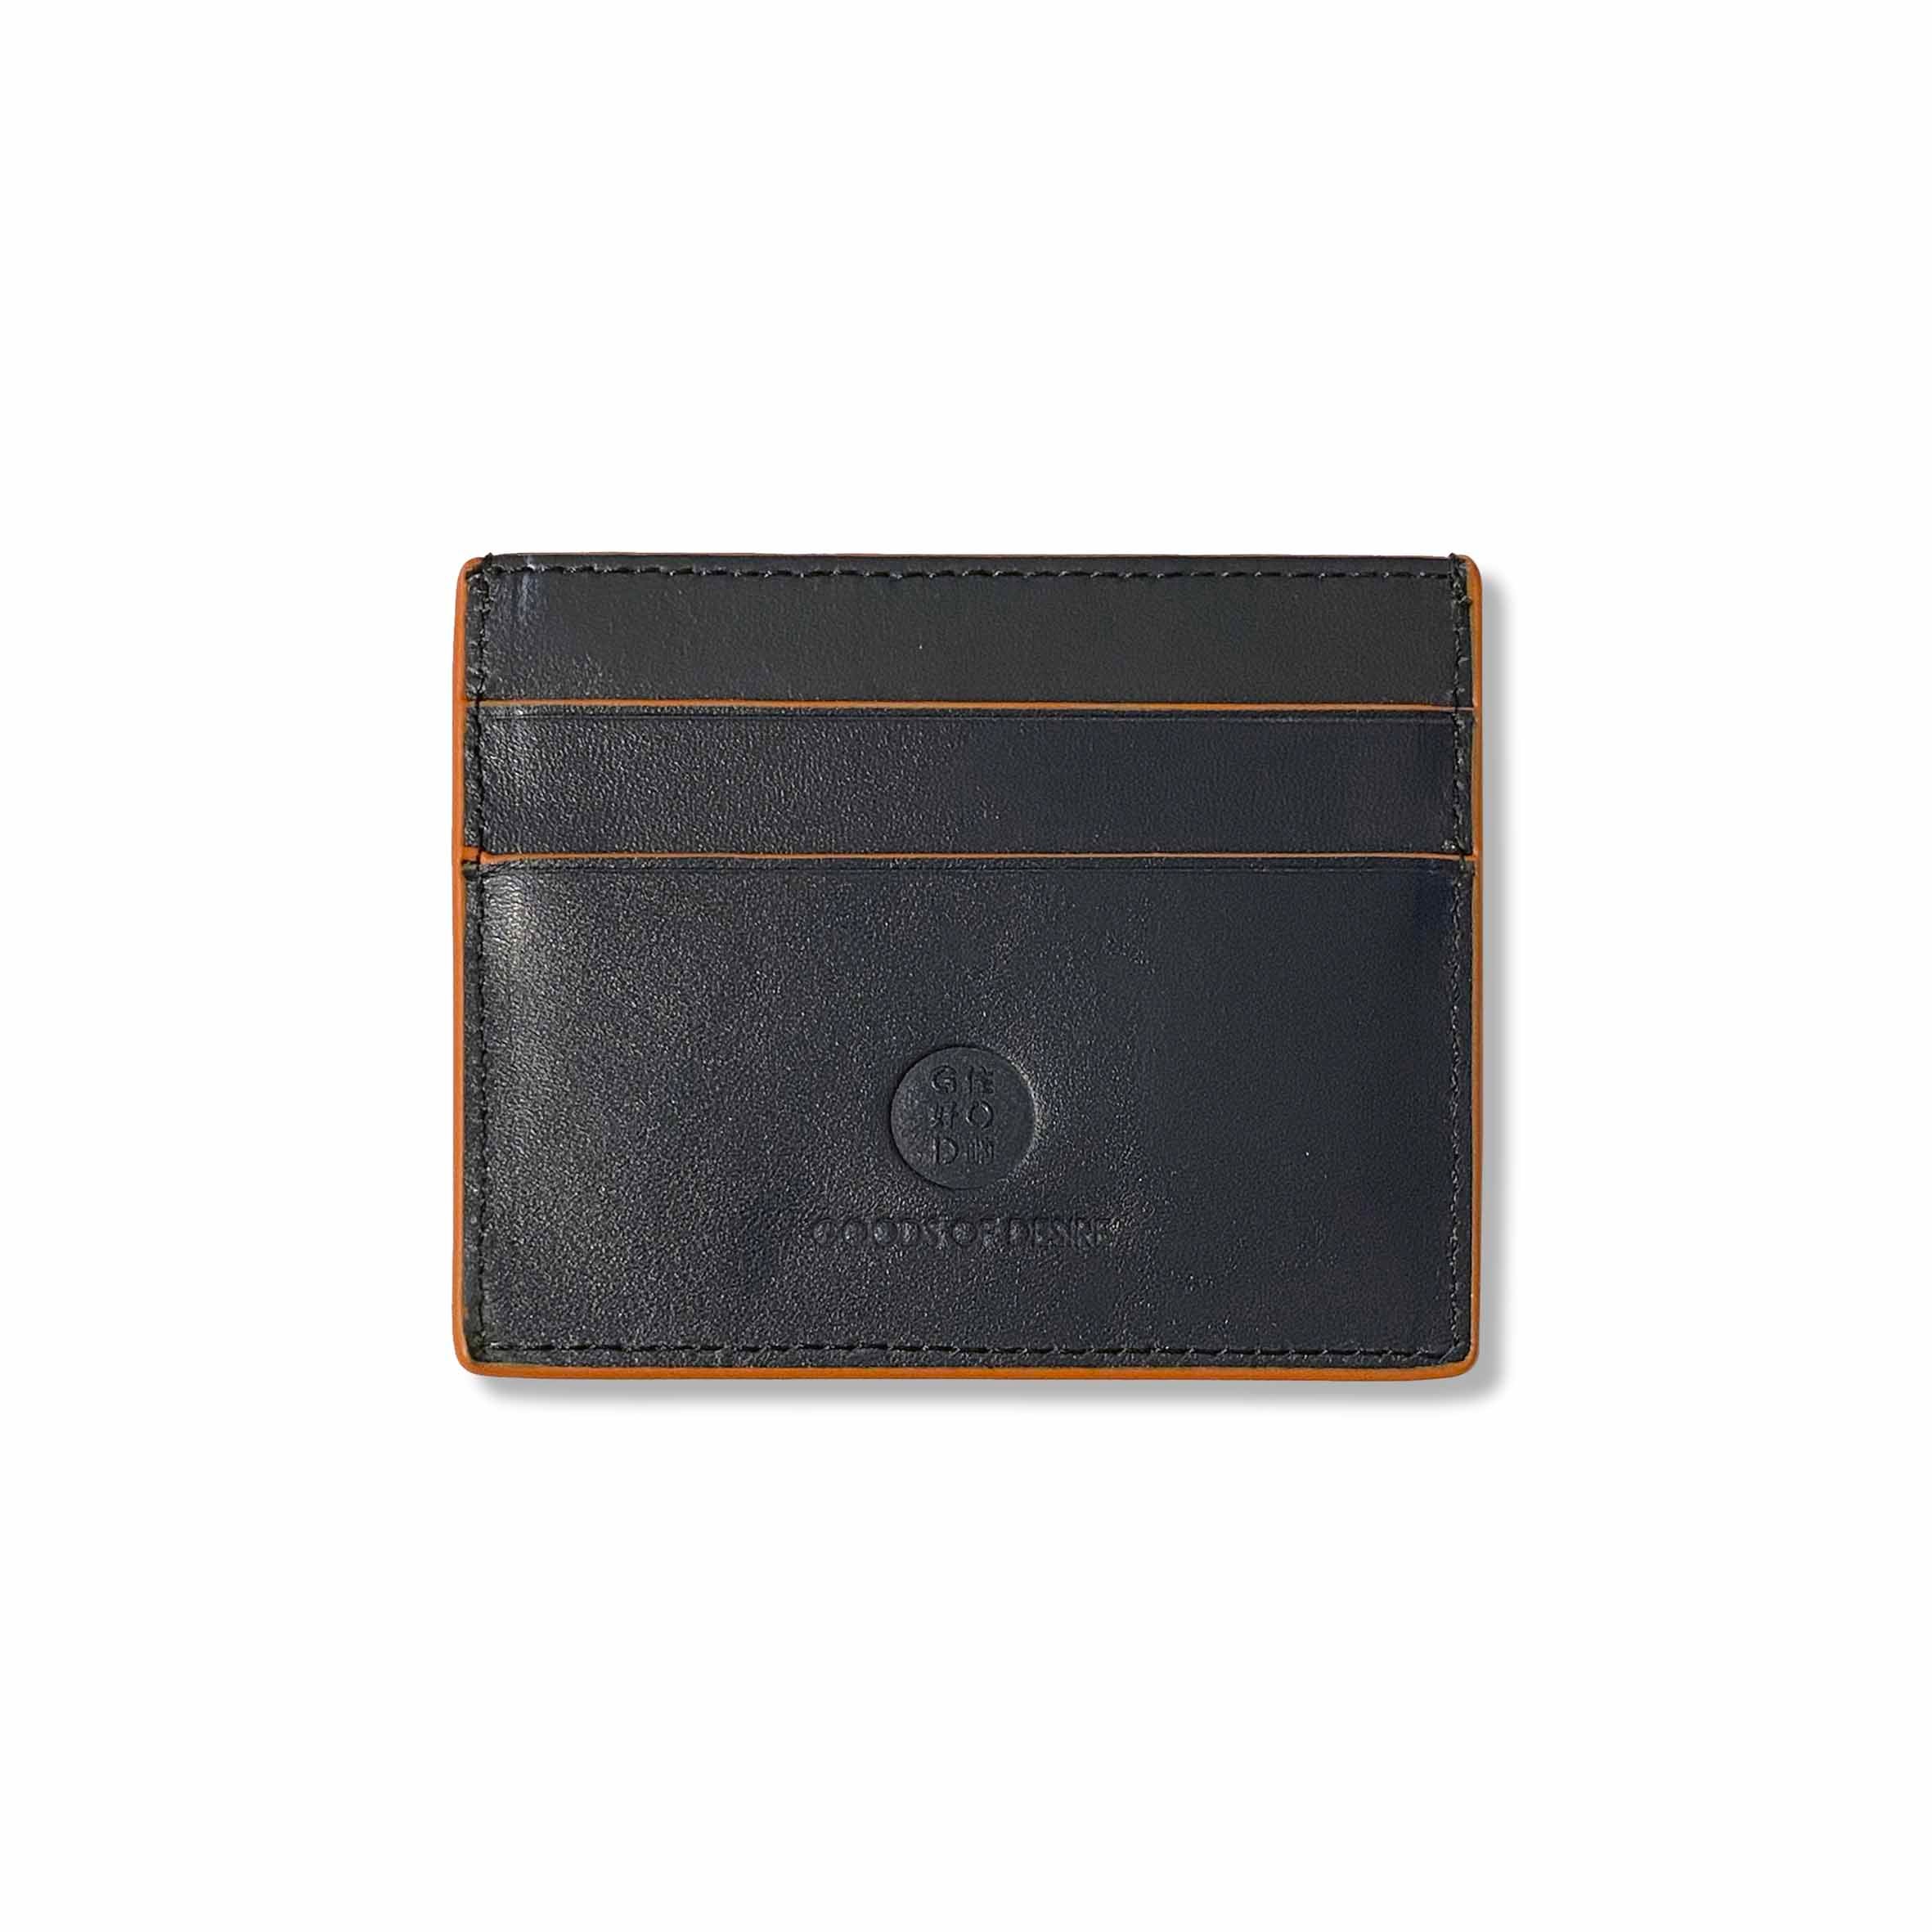 Waves of Clouds Leather Cardholder